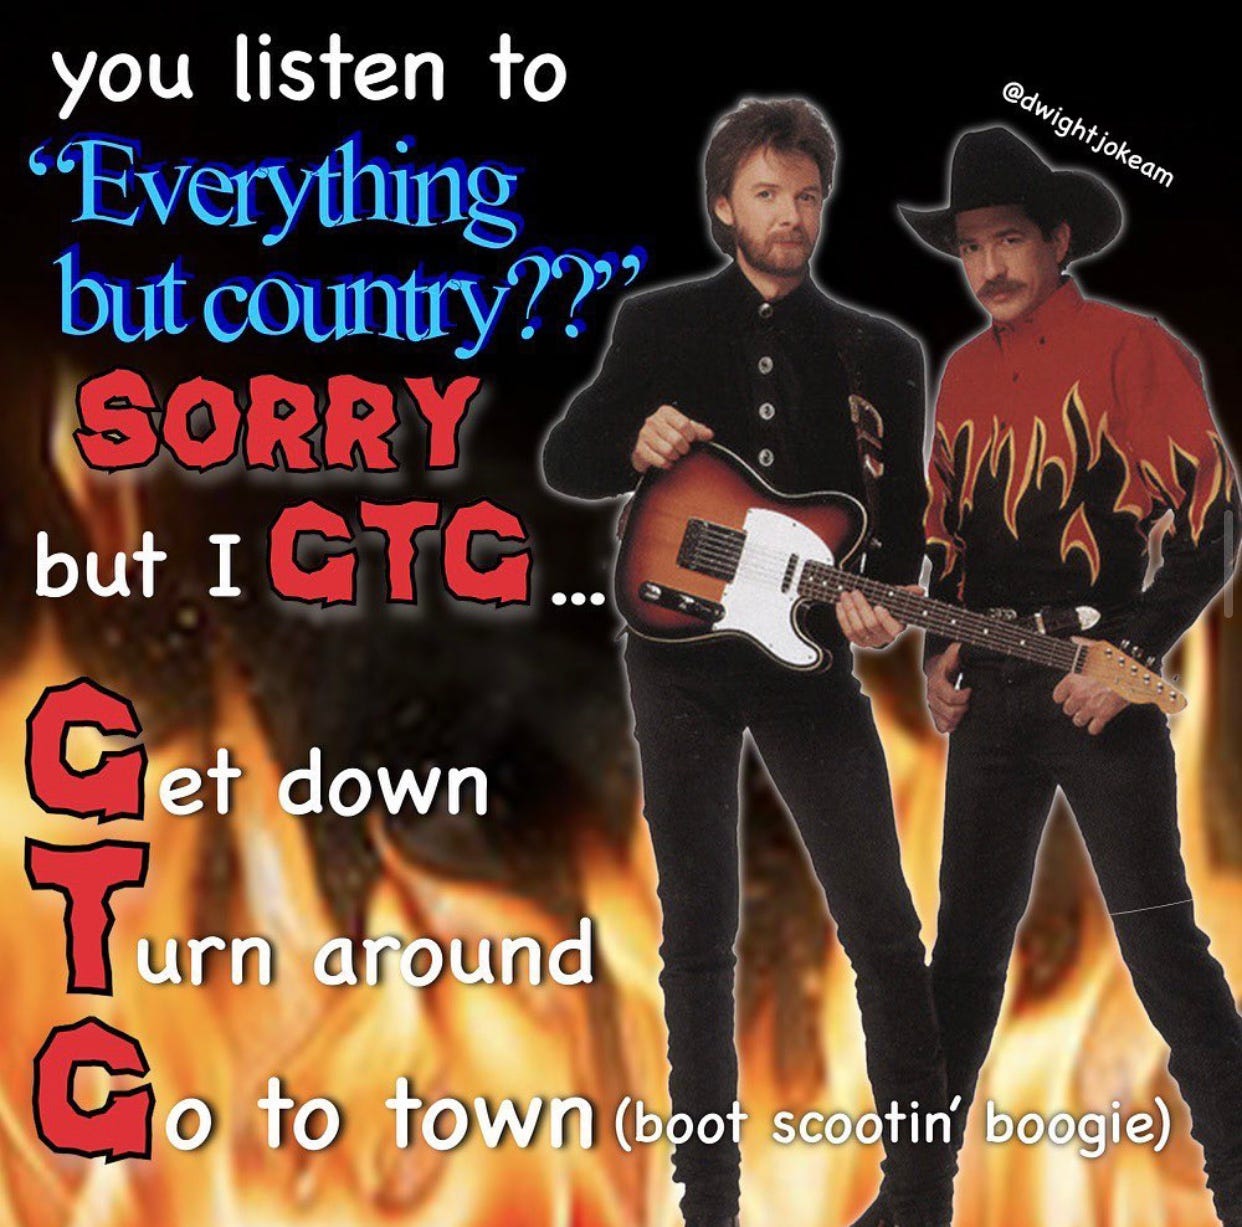 Meme from dwightjokeam that says "You listen to everything but country?" Sorry but I GTG - Get Down, Turn Around, Go to Town (boot scootin boogie)""